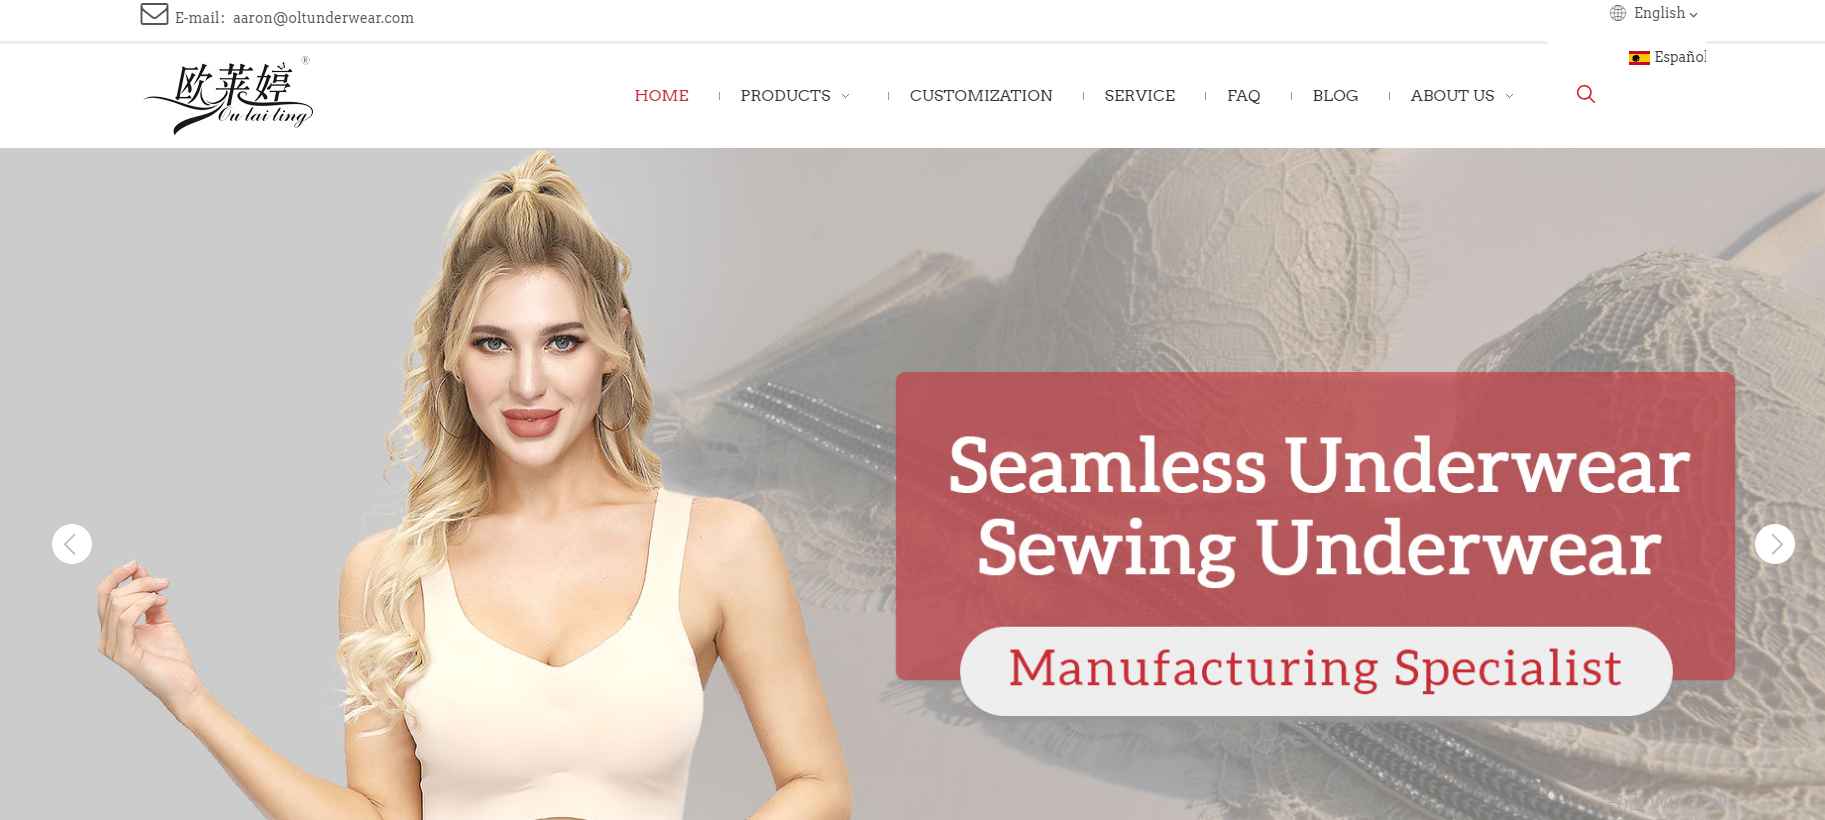 Top 4 lingerie manufacturers in China - Oulaiting